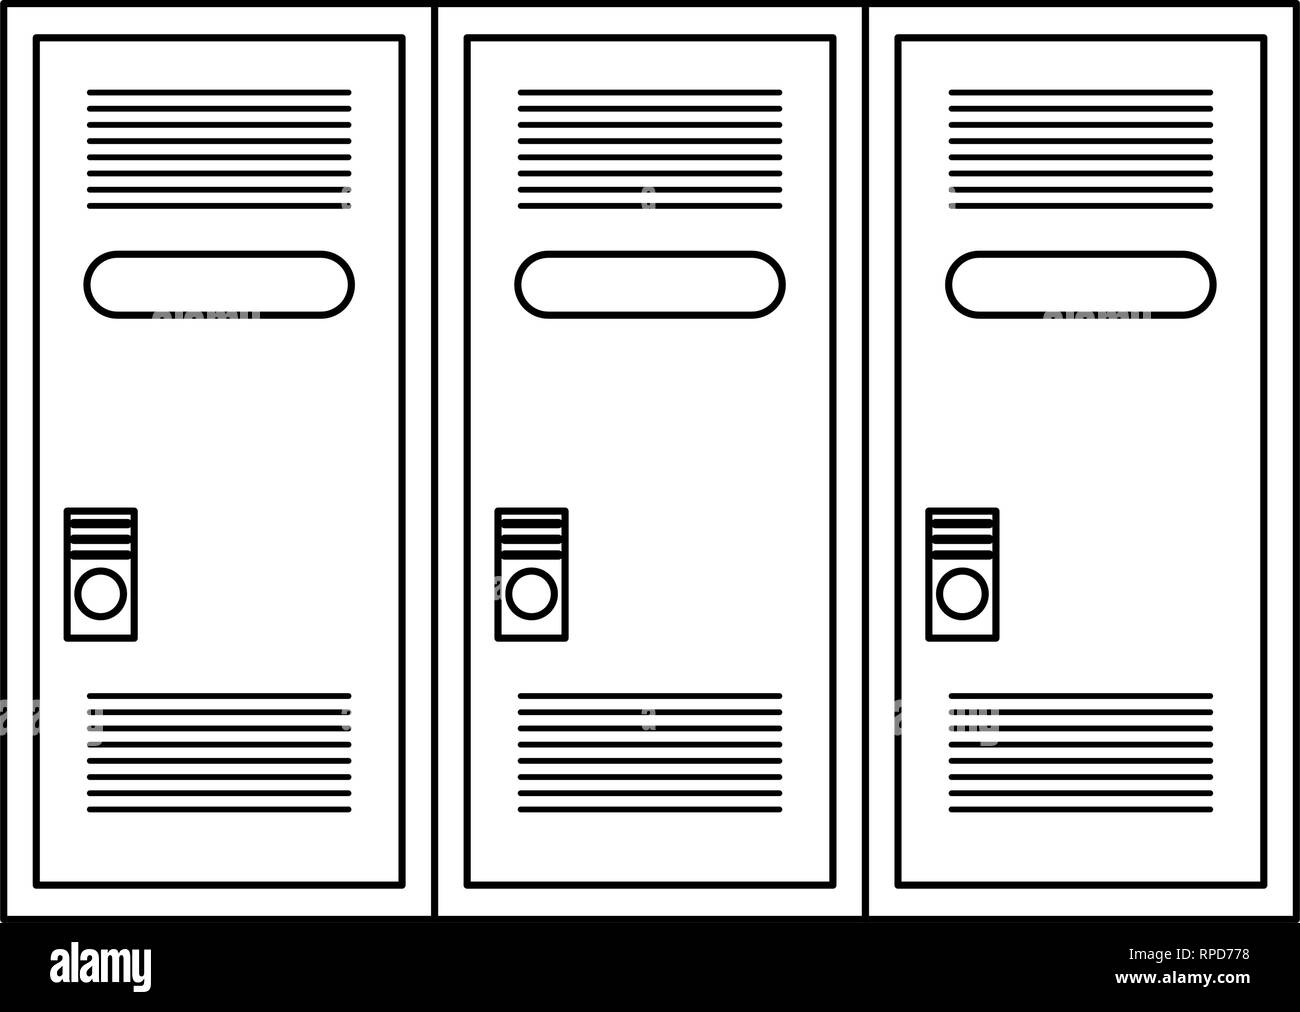 gym lockers storage isolated black and white Stock Vector